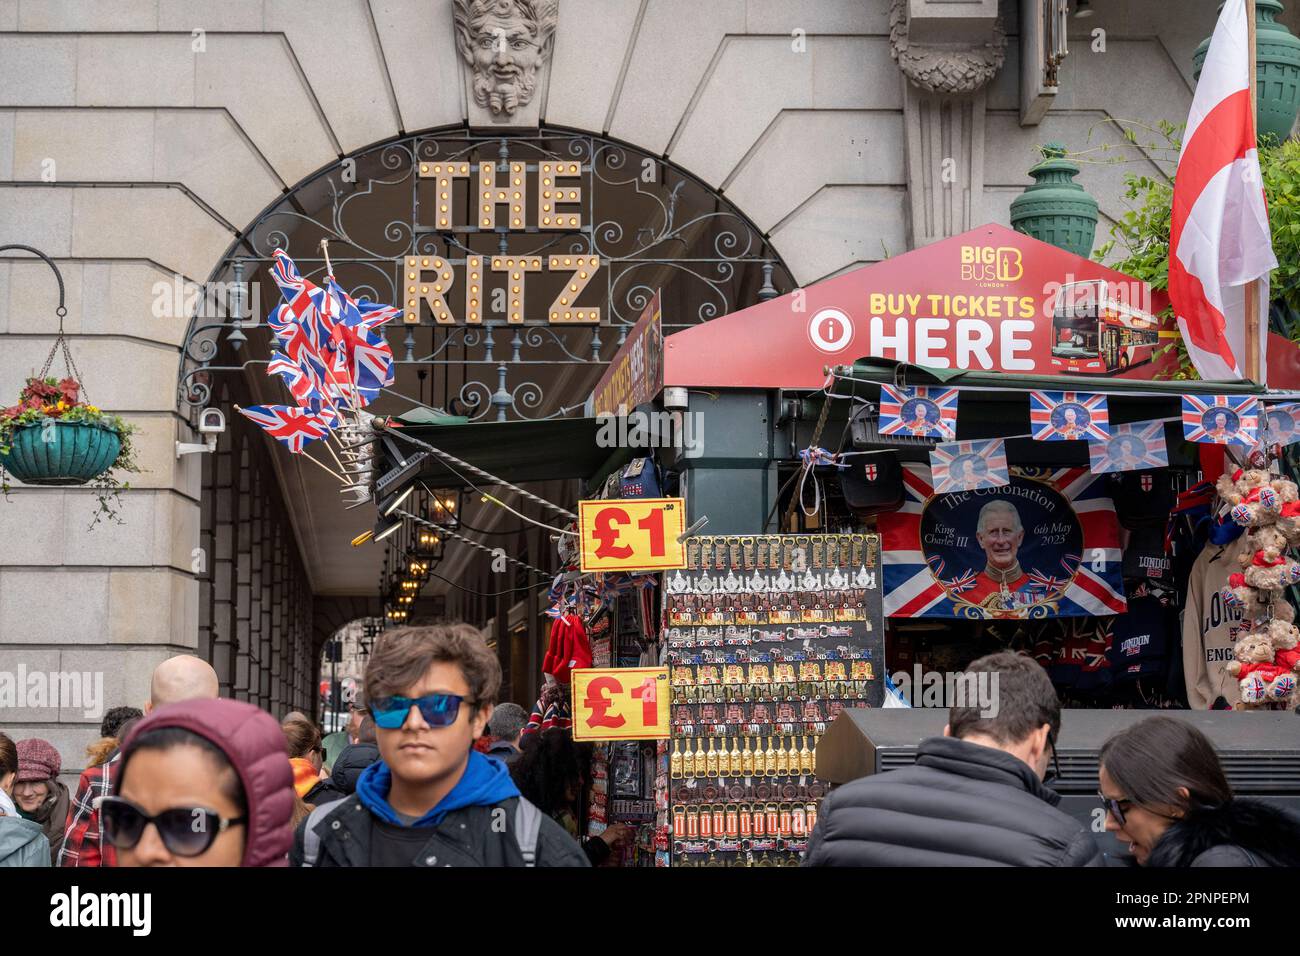 With two weeks before the coronation of King Charles III takes place, tourist souvenirs including the new king's face is on sale next to the Ritz on Piccadilly, on 19th April 2023, in London, England. King Charles will succeed Queen Elizabeth II on 6th May, who passed away last year. Stock Photo